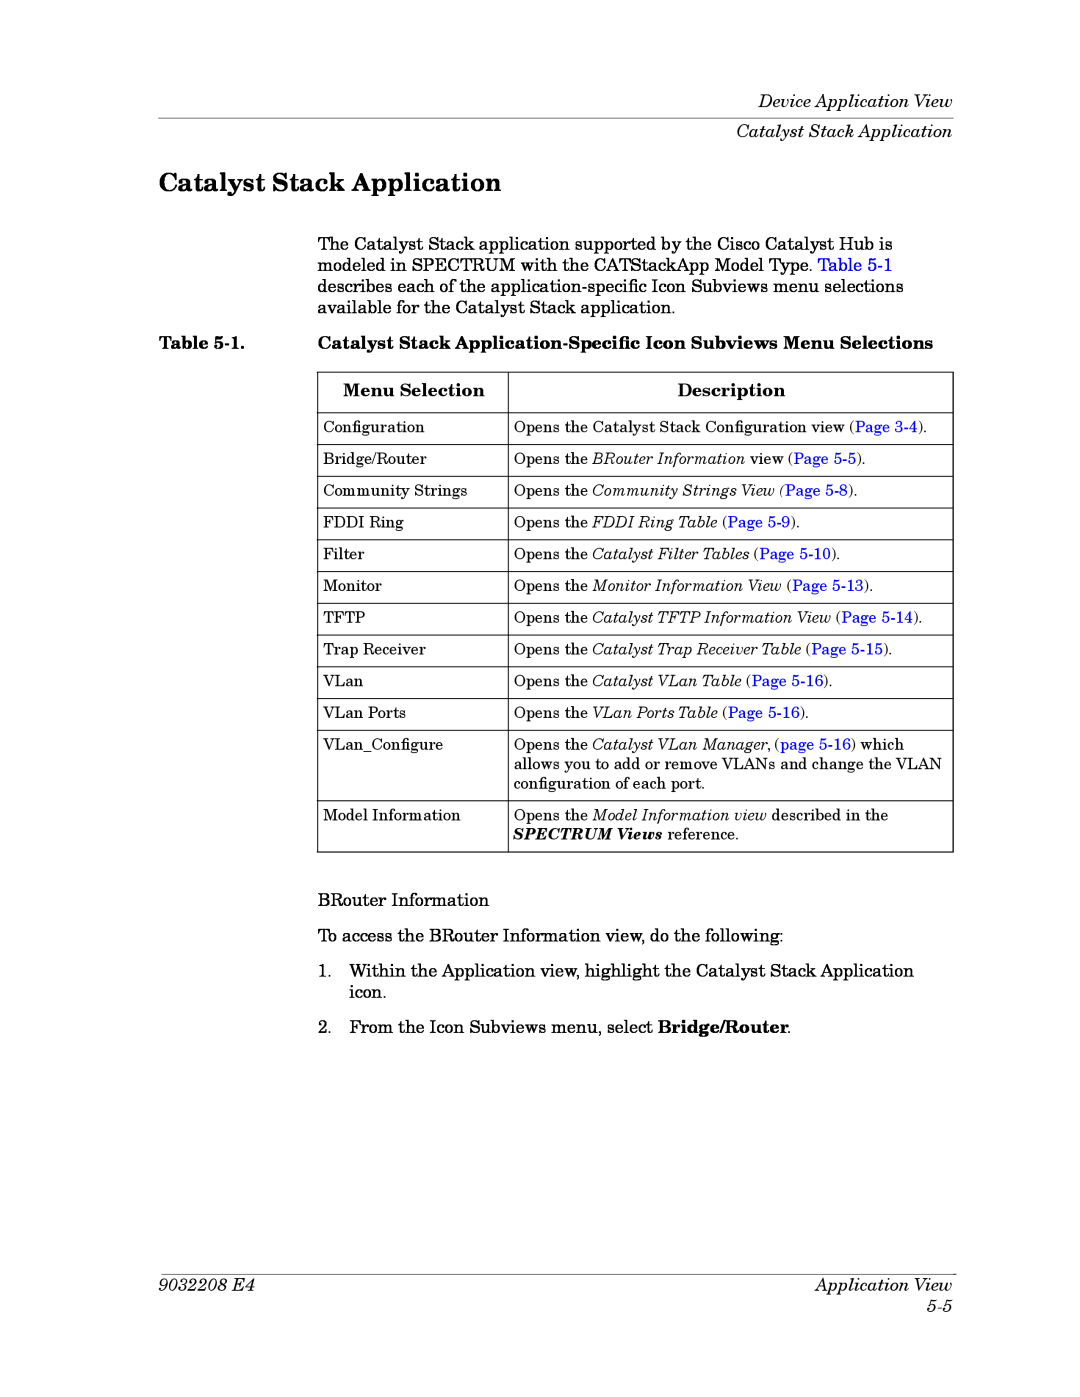 Cabletron Systems 5000, 5500 manual Device Application View Catalyst Stack Application, Menu Selection, Description 